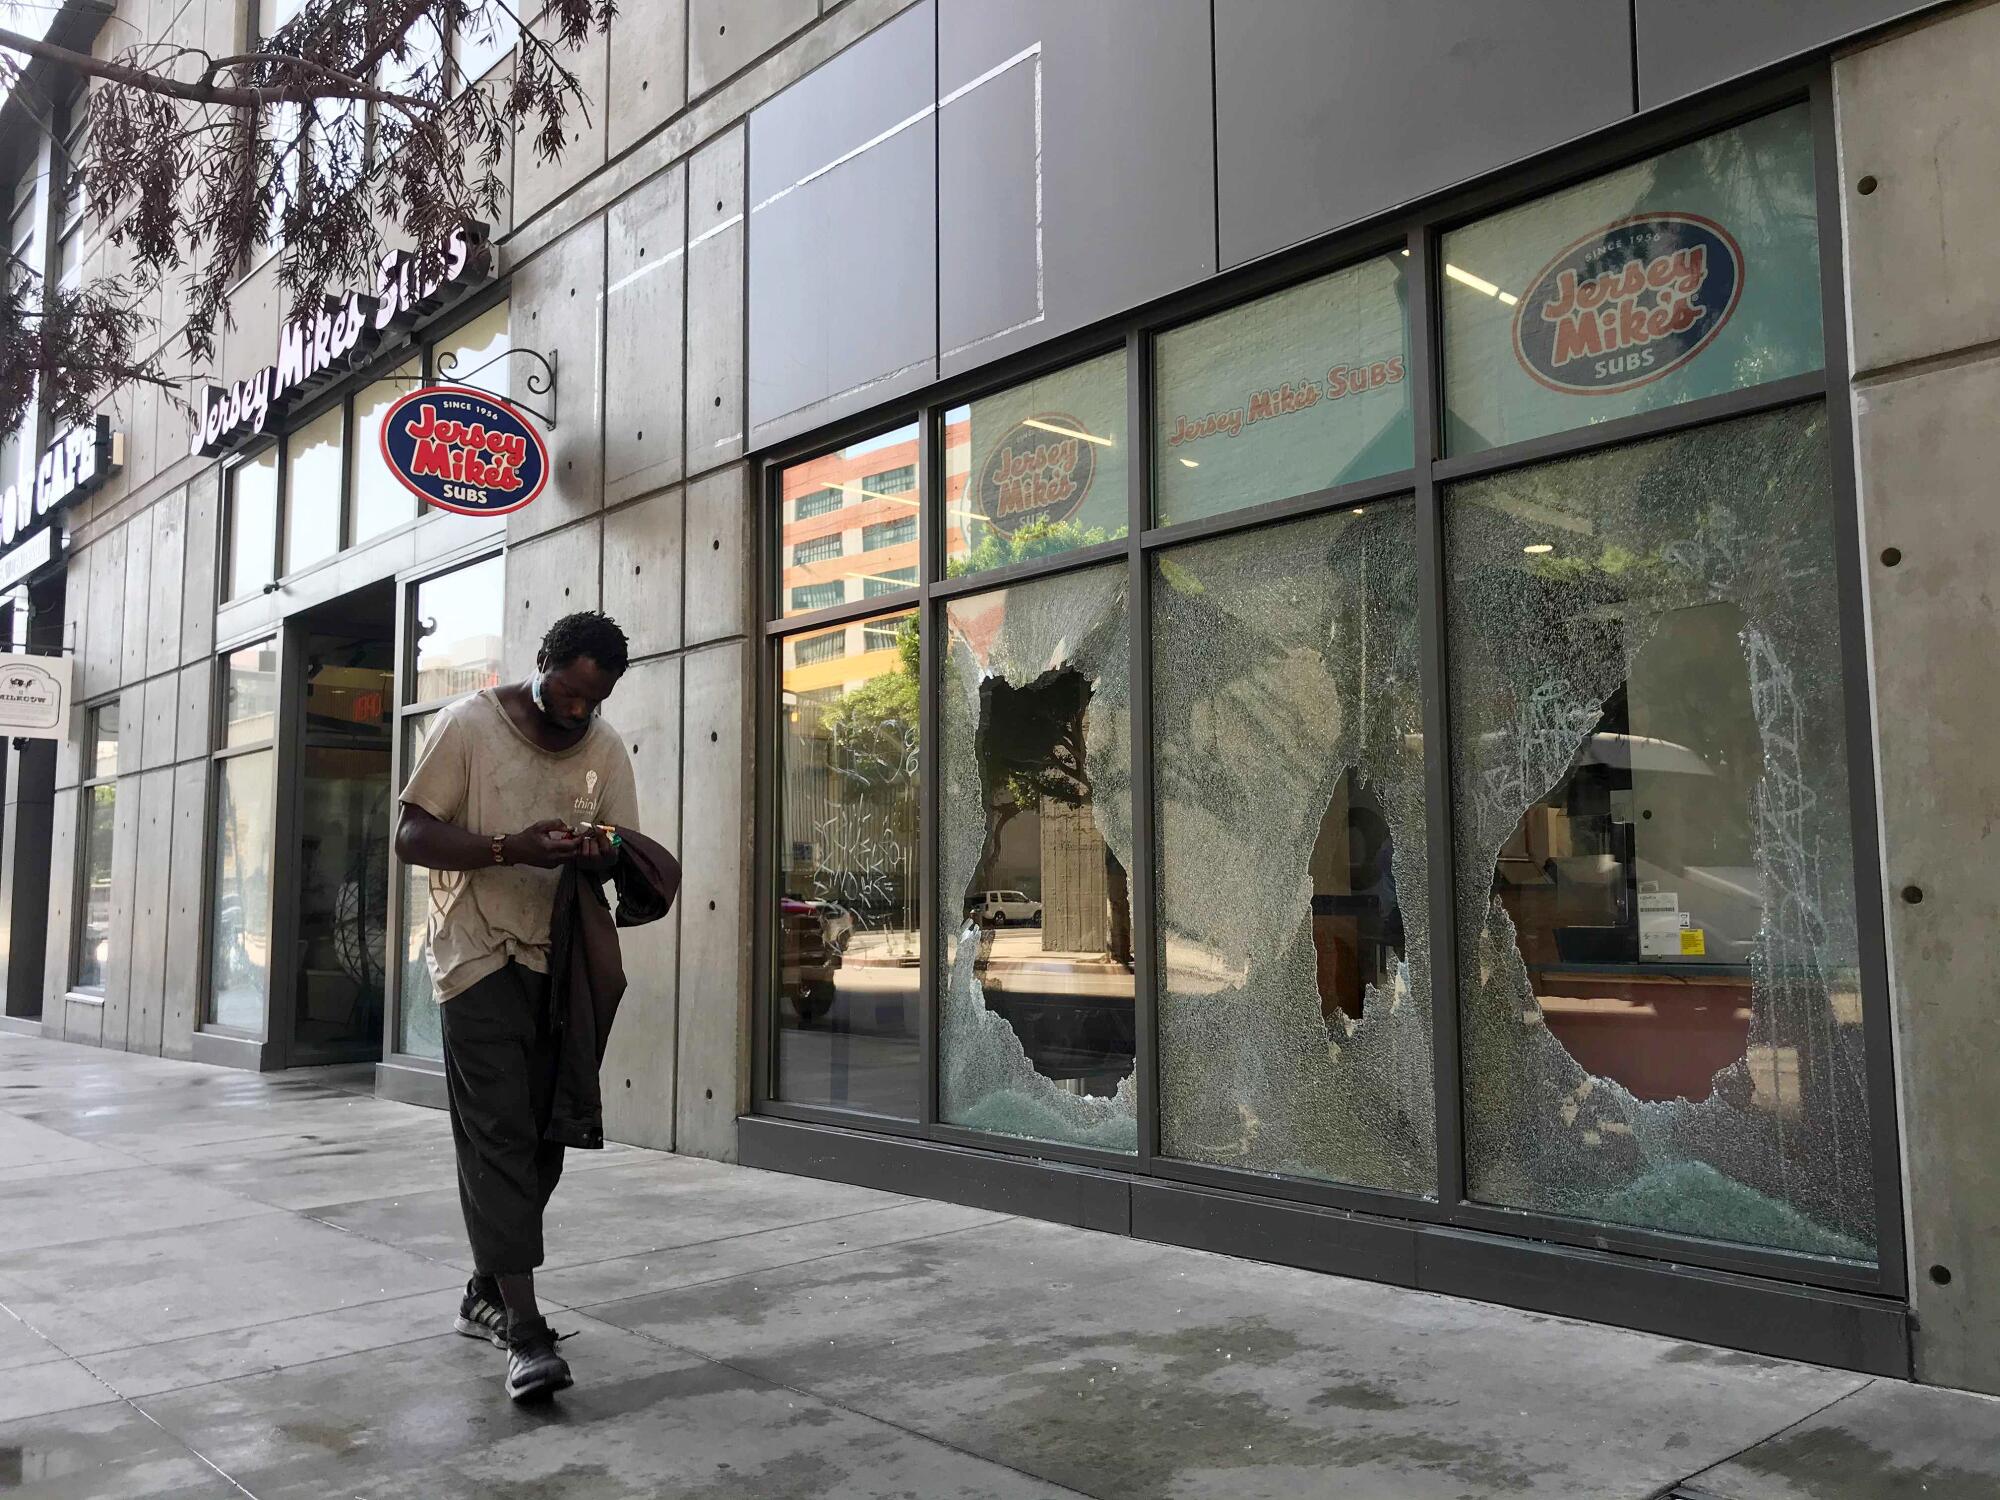 A man walks by broken windows at a Jersey Mike’s near Staples Center after Sunday night’s Lakers celebration.